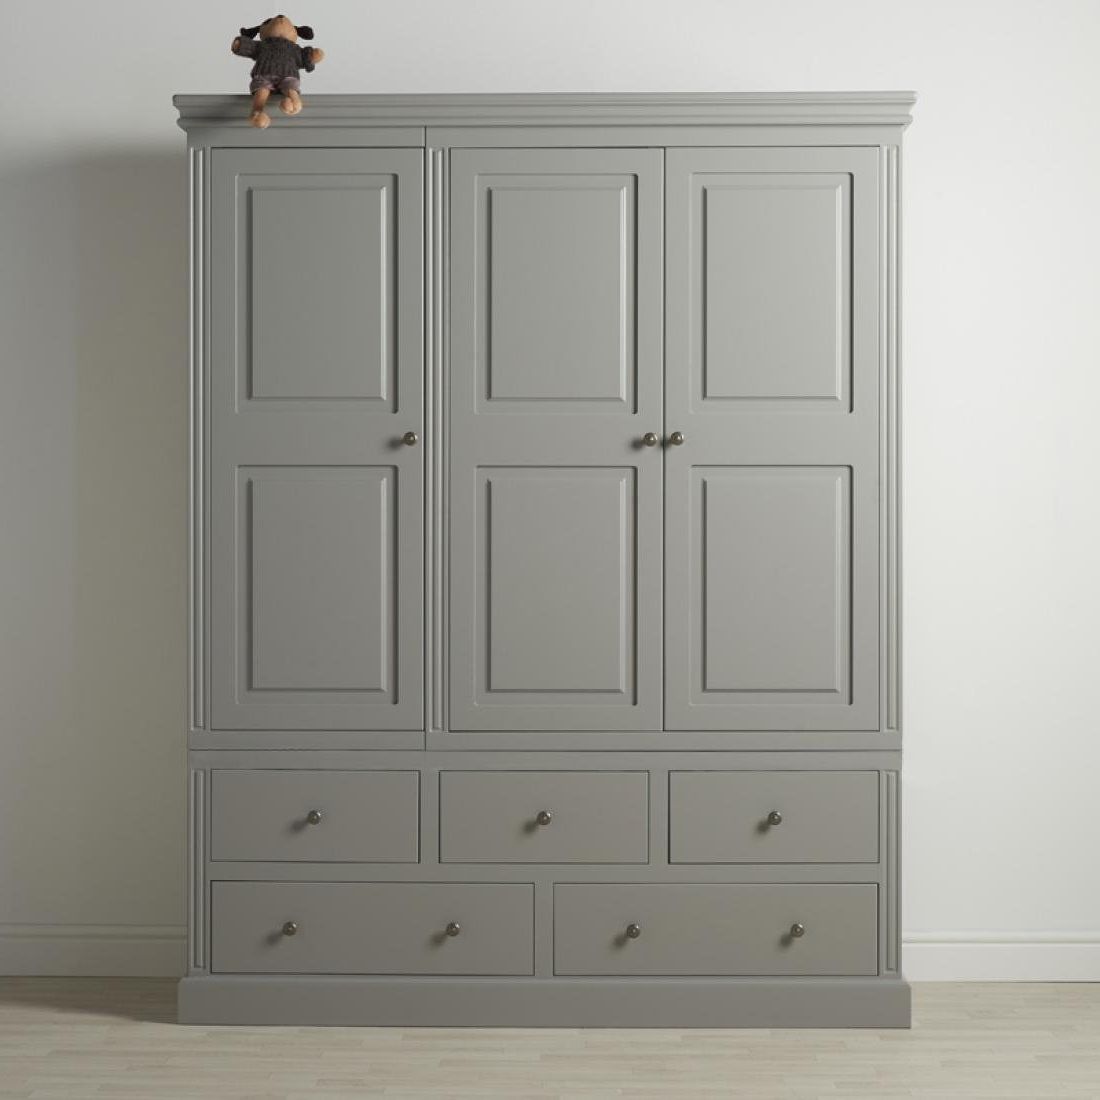 Archie 3 Door 5 Drawer Wardrobe | Boys Wardrobes | Kids Bedrooms |  Childrens Furniture Intended For Cheap Wardrobes With Drawers (Gallery 8 of 20)